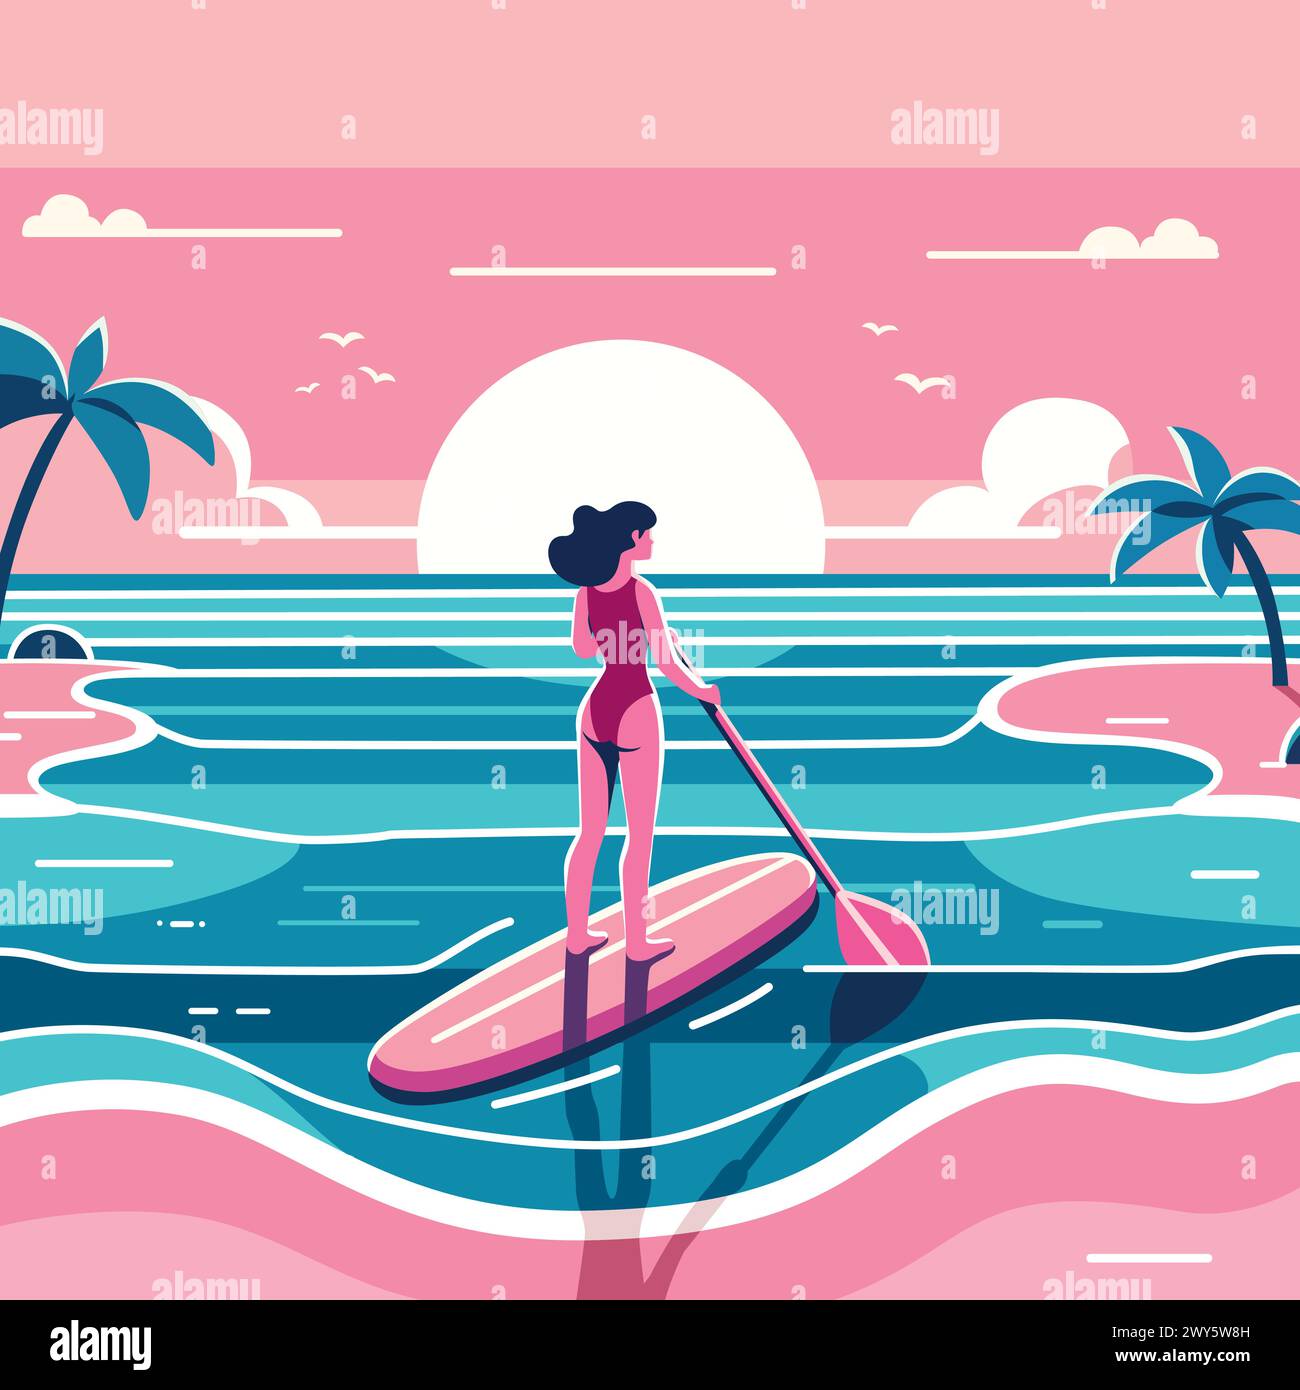 Flat design illustration of a woman paddleboarding at sunset with palm trees silhouetted against a pastel sky. Stock Vector